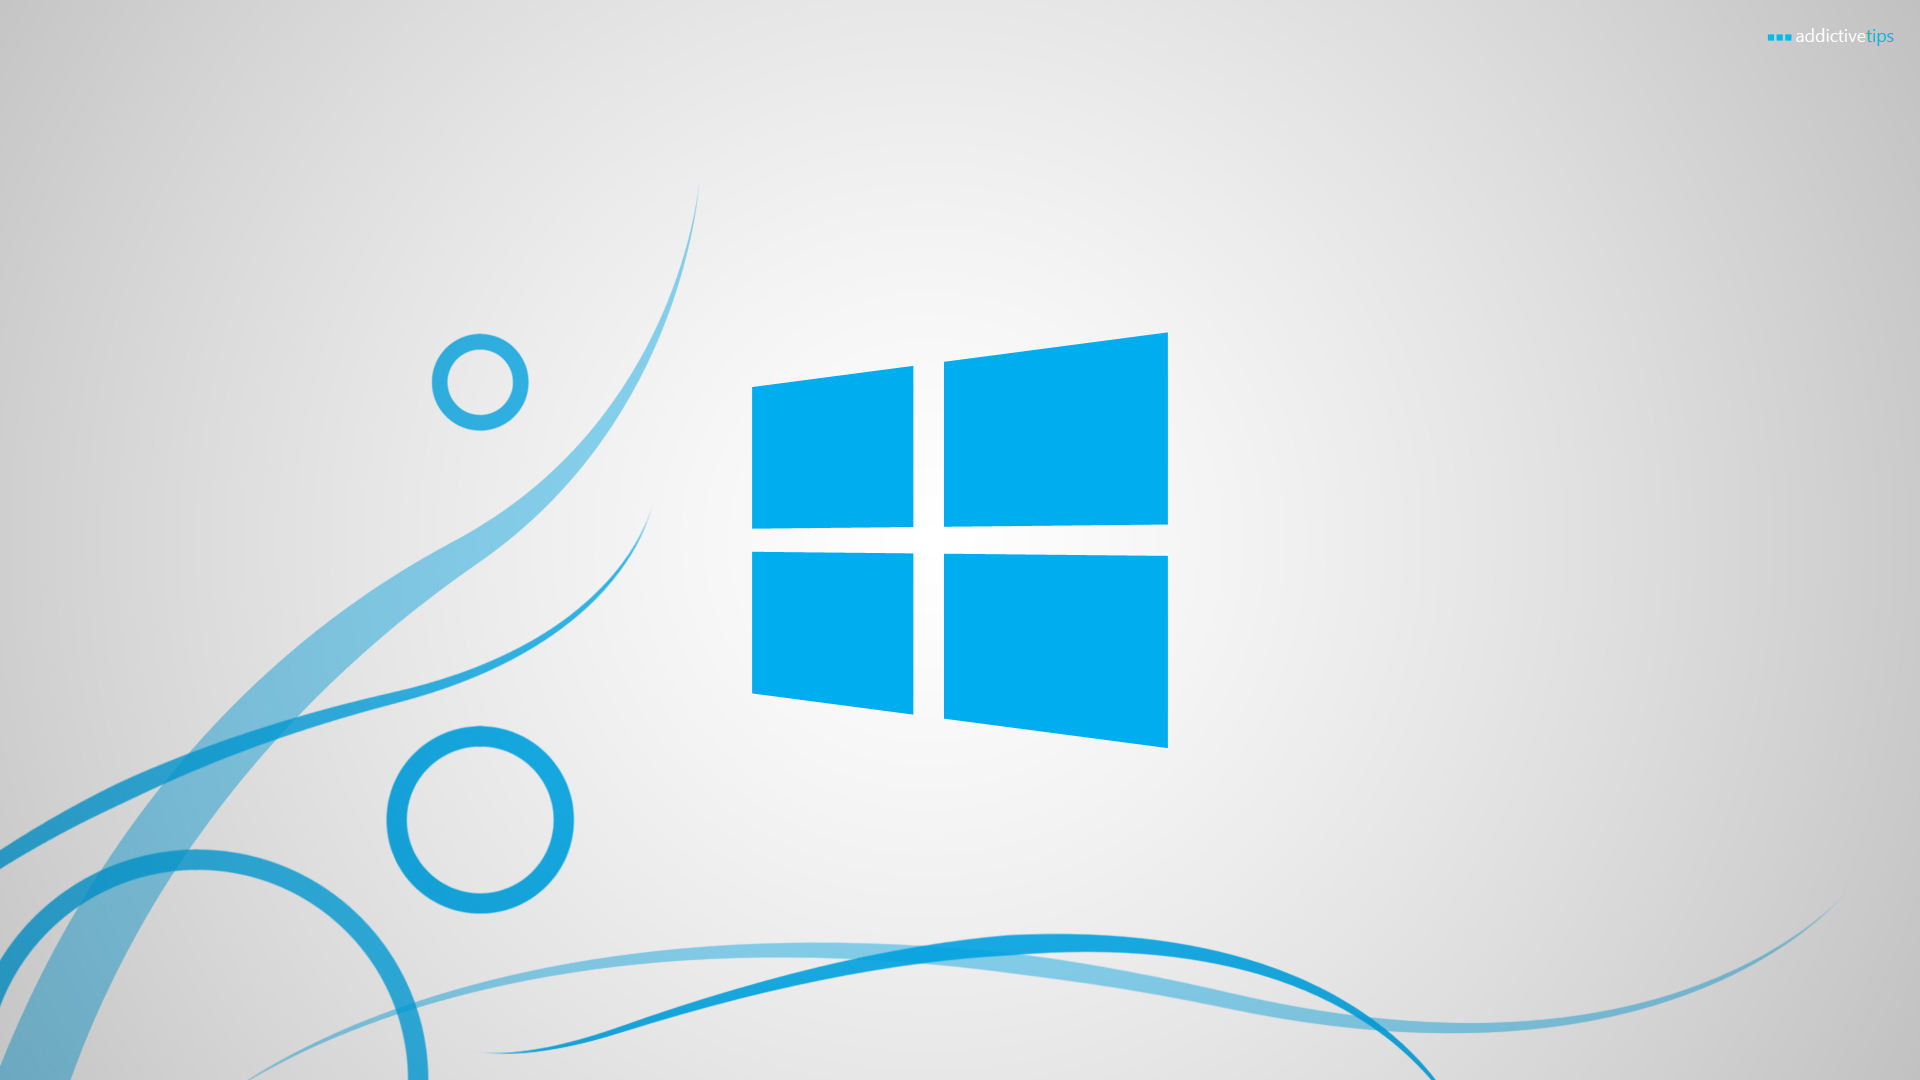 Windows 8 Wallpaper Set 7 | Awesome Wallpapers